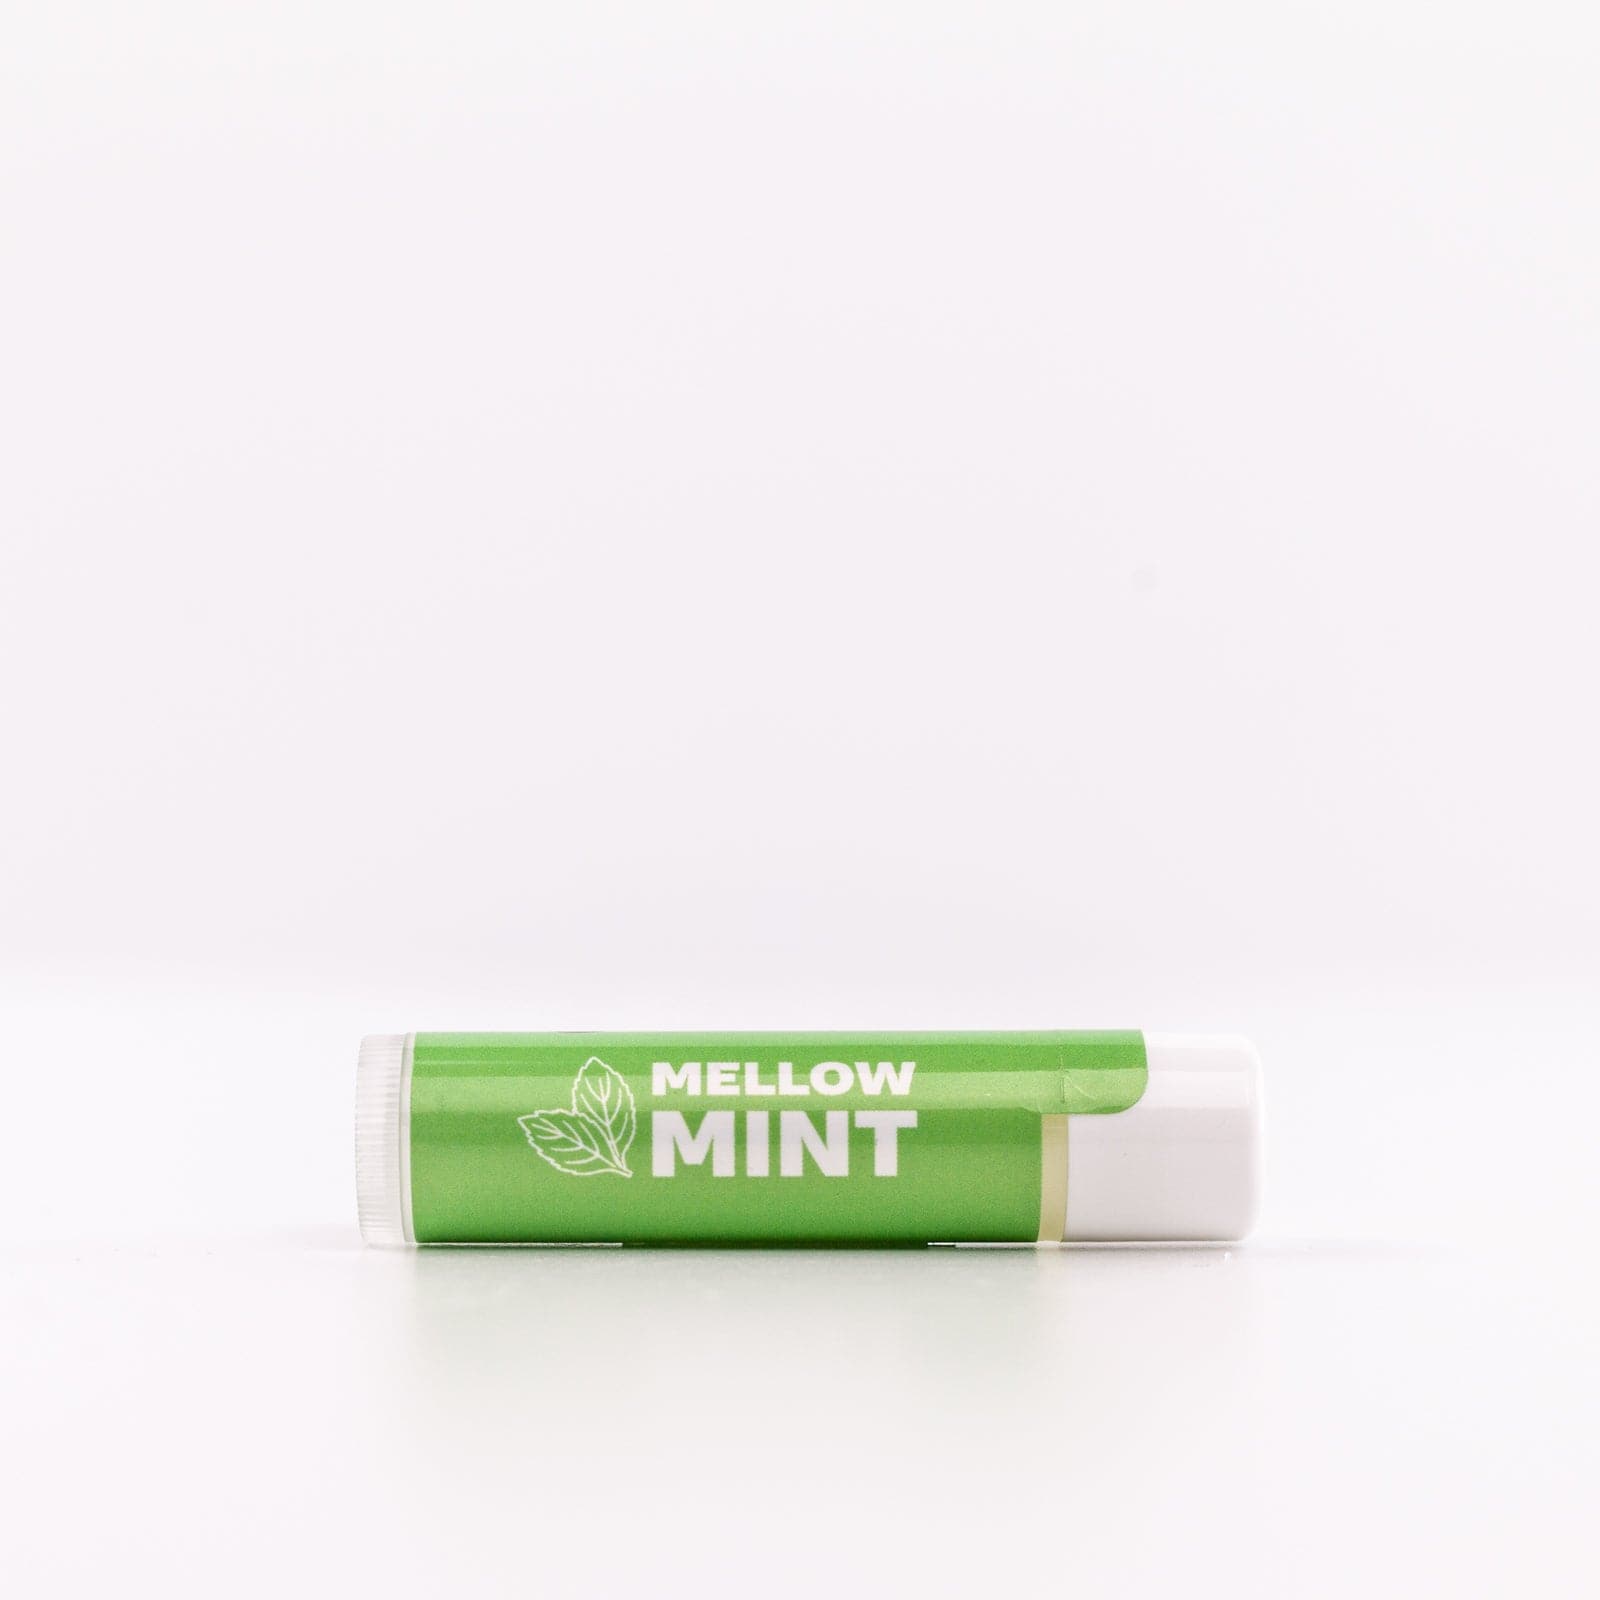 one Mellow Mint Lip Balm placed on it's side